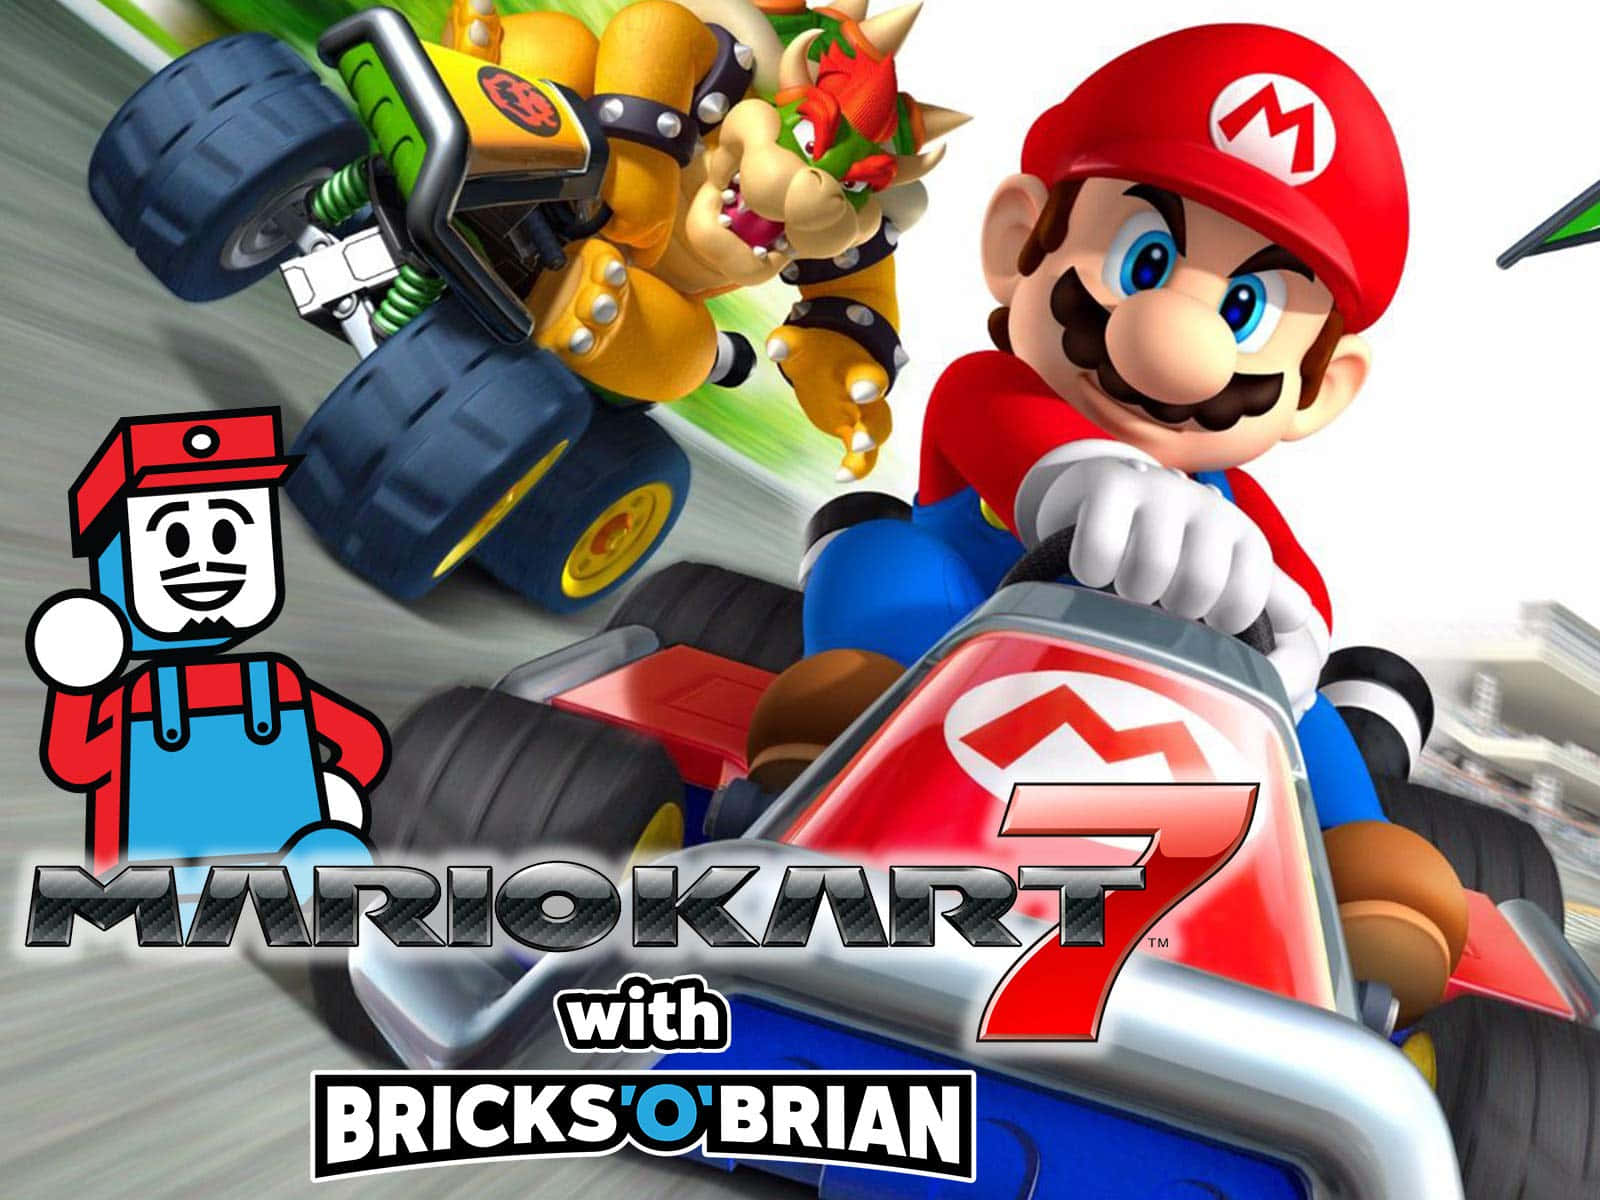 Race the unpredictable with your favorite koopa in Mario Kart